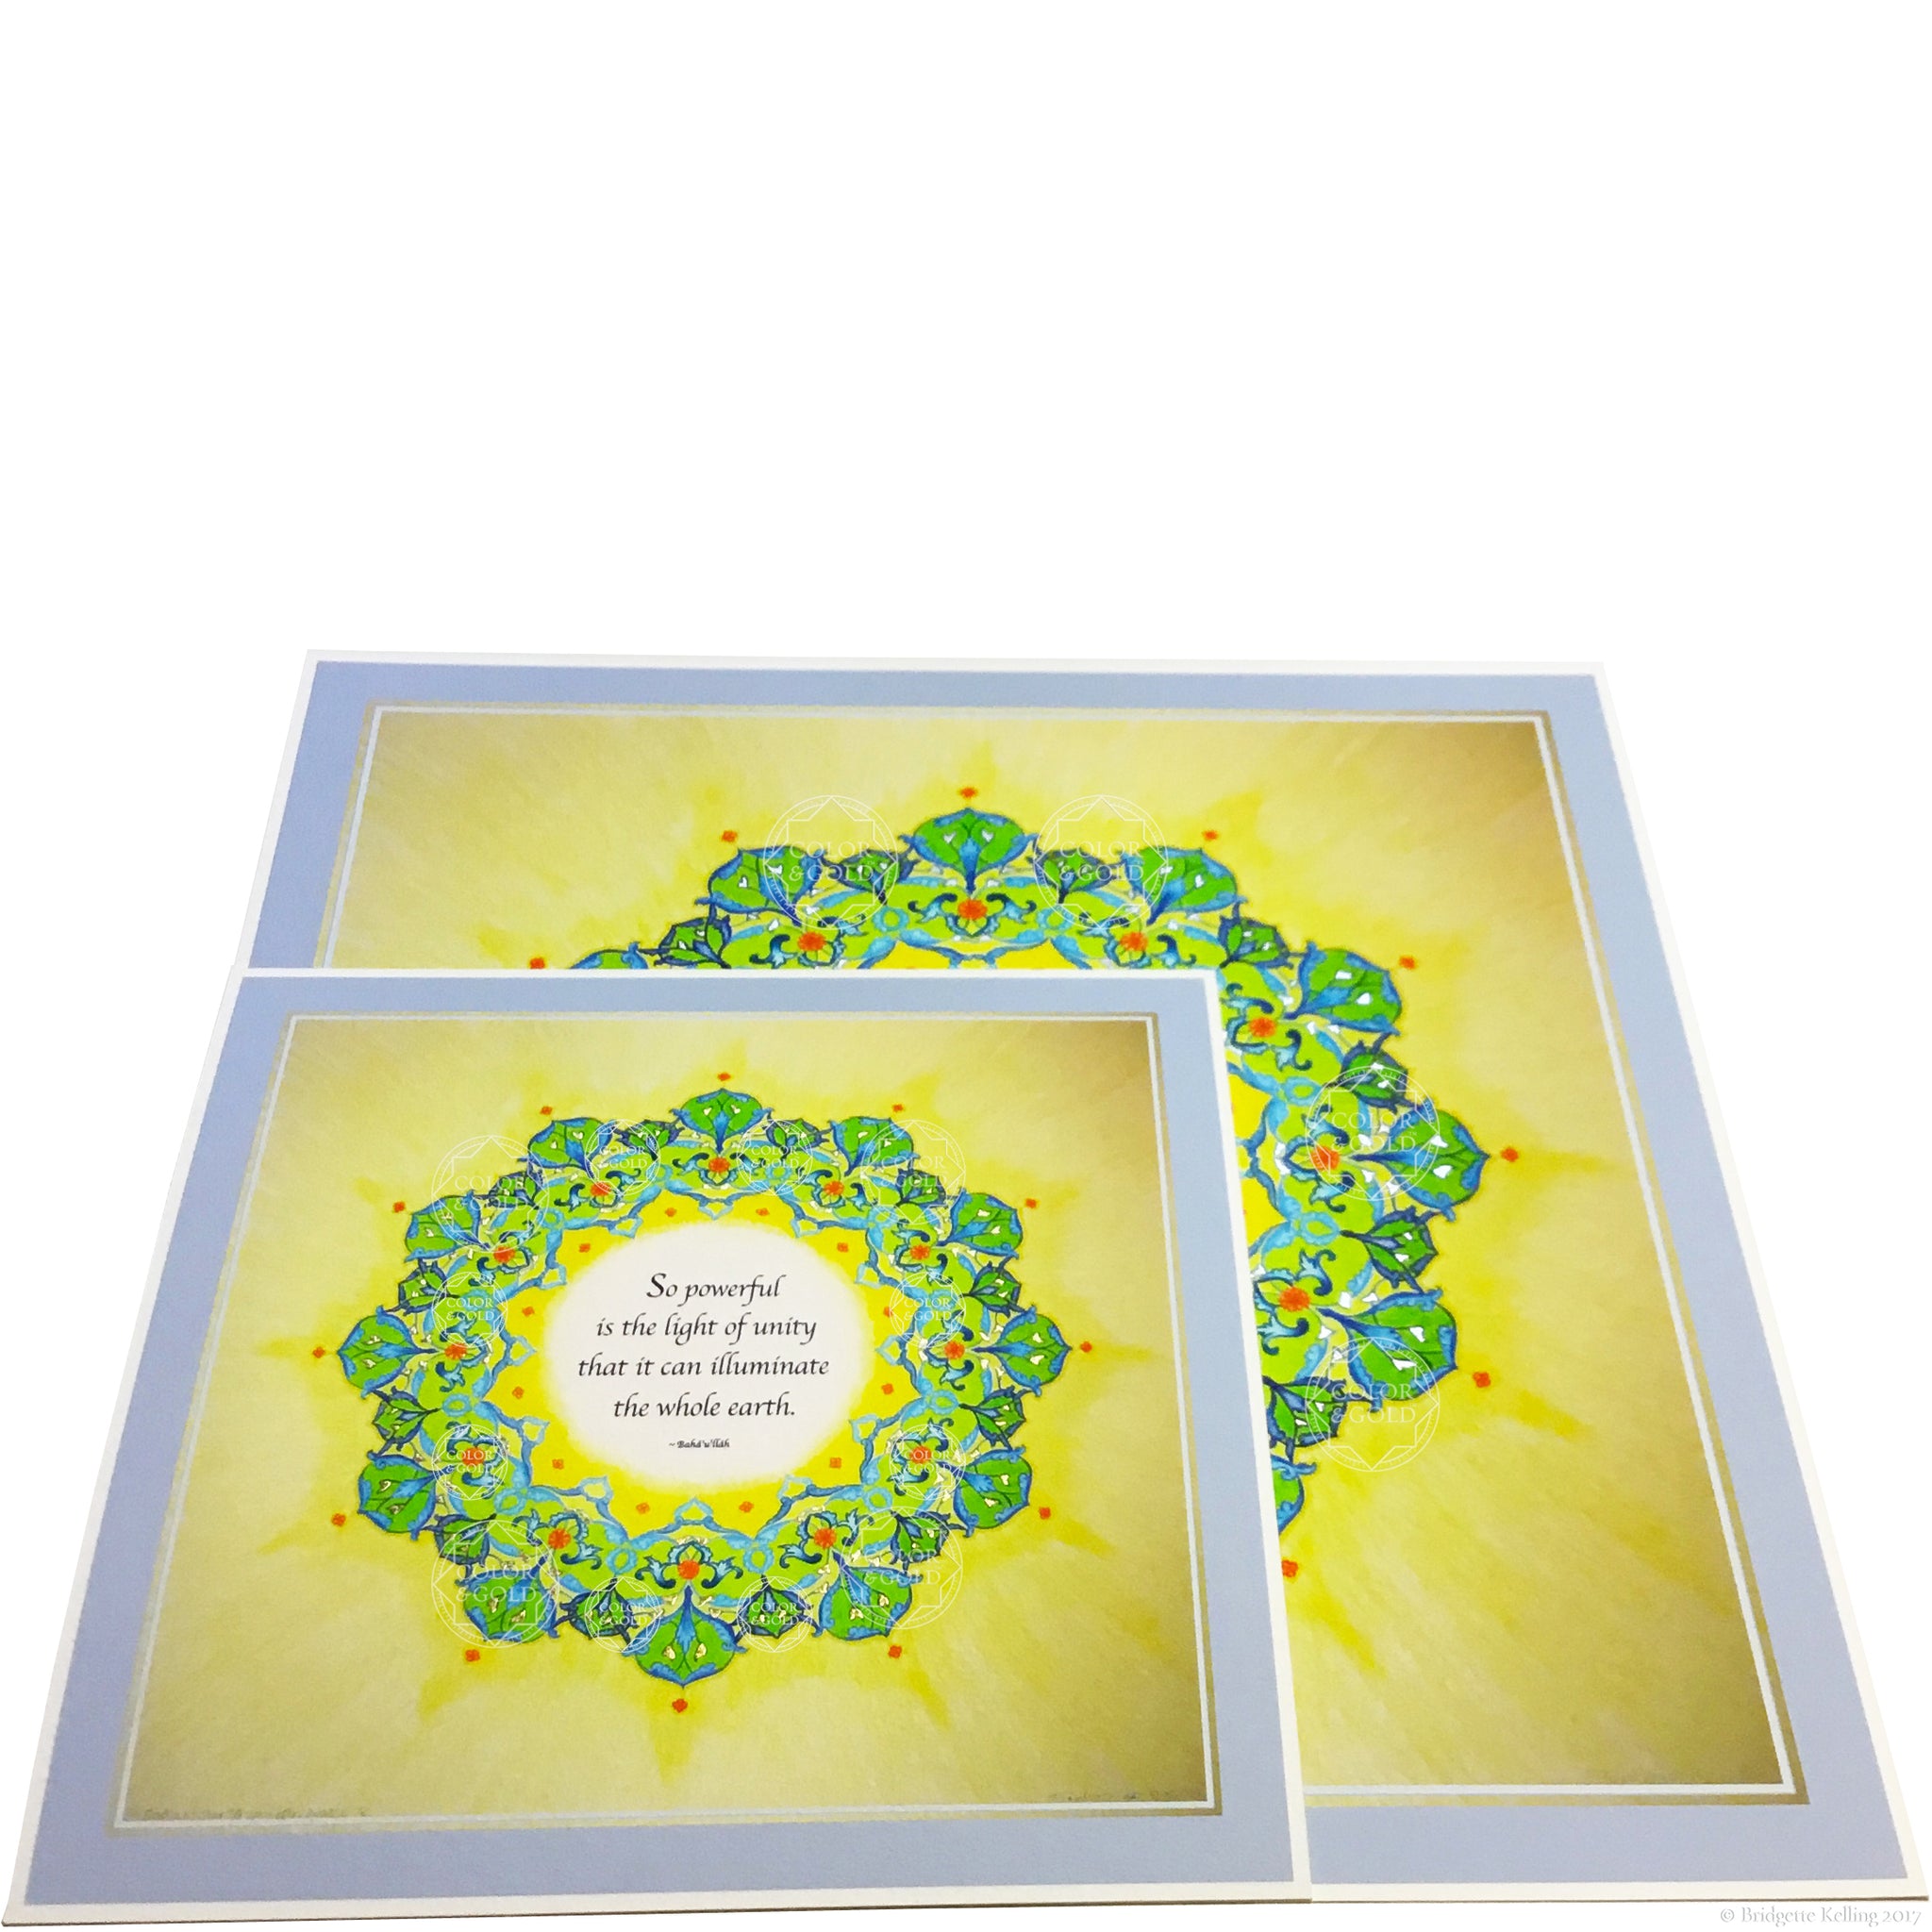 Green, yellow & 24 kt gold and palladium gilded mandalas with a Bahá’í quotation on unity - Color & Gold LLC © Bridgette Kelling